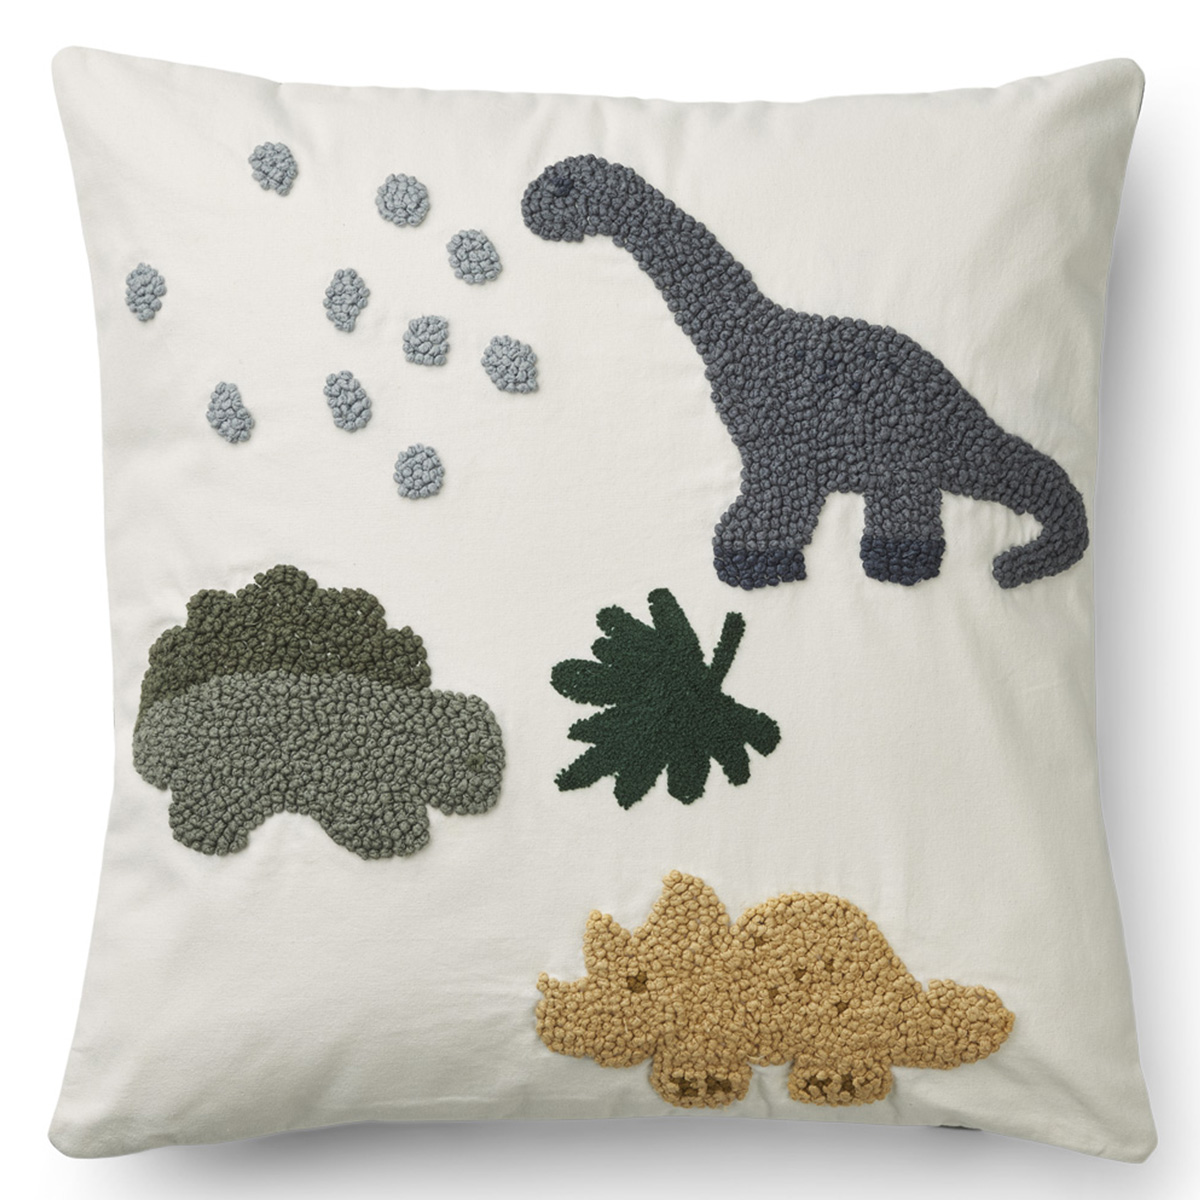 Coussin Coussin Belton - Dino Multi Mix Coussin Belton - Dino Multi Mix